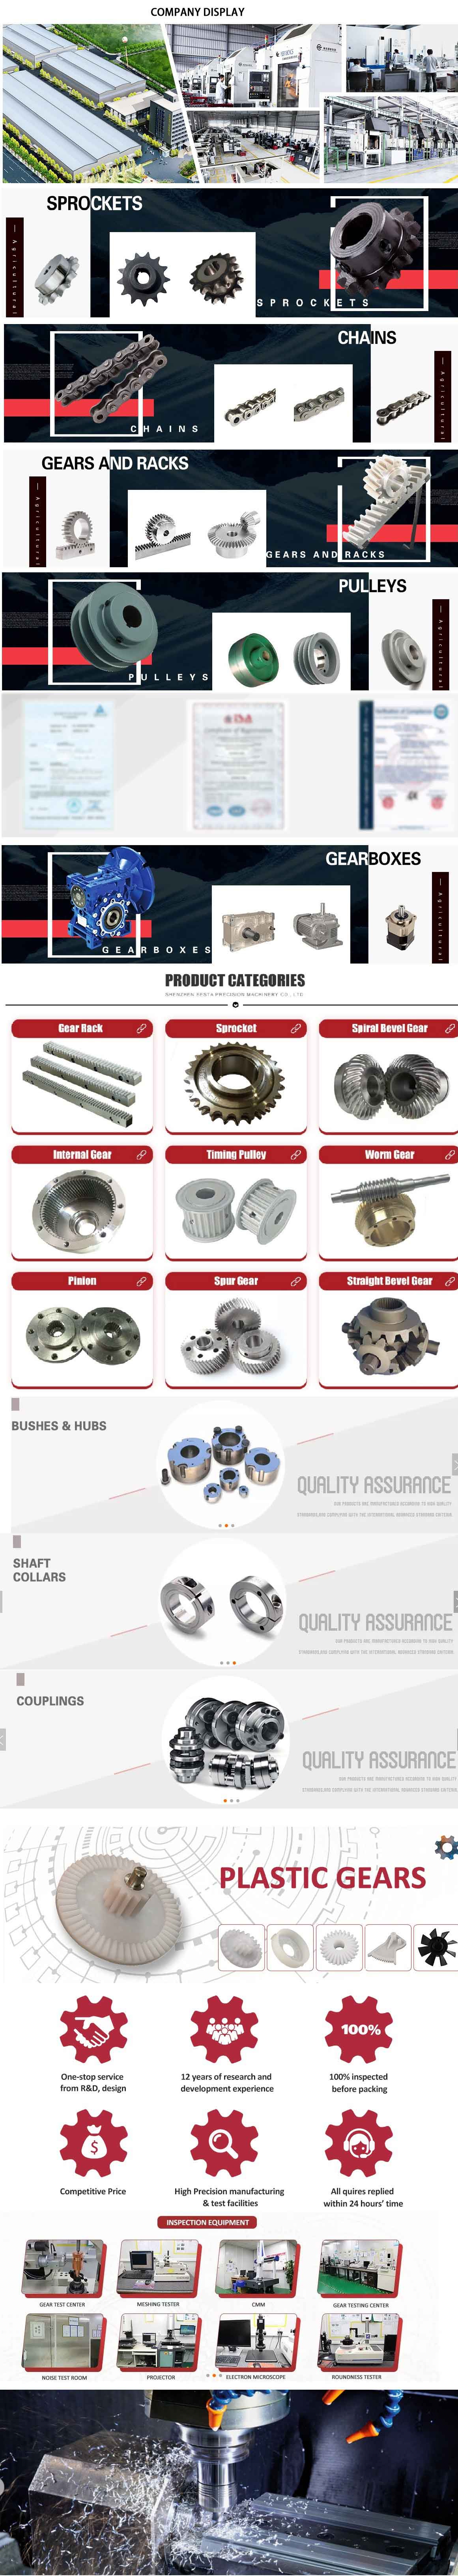 Construction  made in China - replacement parts -   post hole digger gearbox price   Bologna Italy   Machinery Are Used in Gearbox, Instrument, Motor, Electric Appliance, Internal Combustion Engine, Agriculture, 62 28-2RS Deep Groove Ball Bearing with ce certificate top quality low price